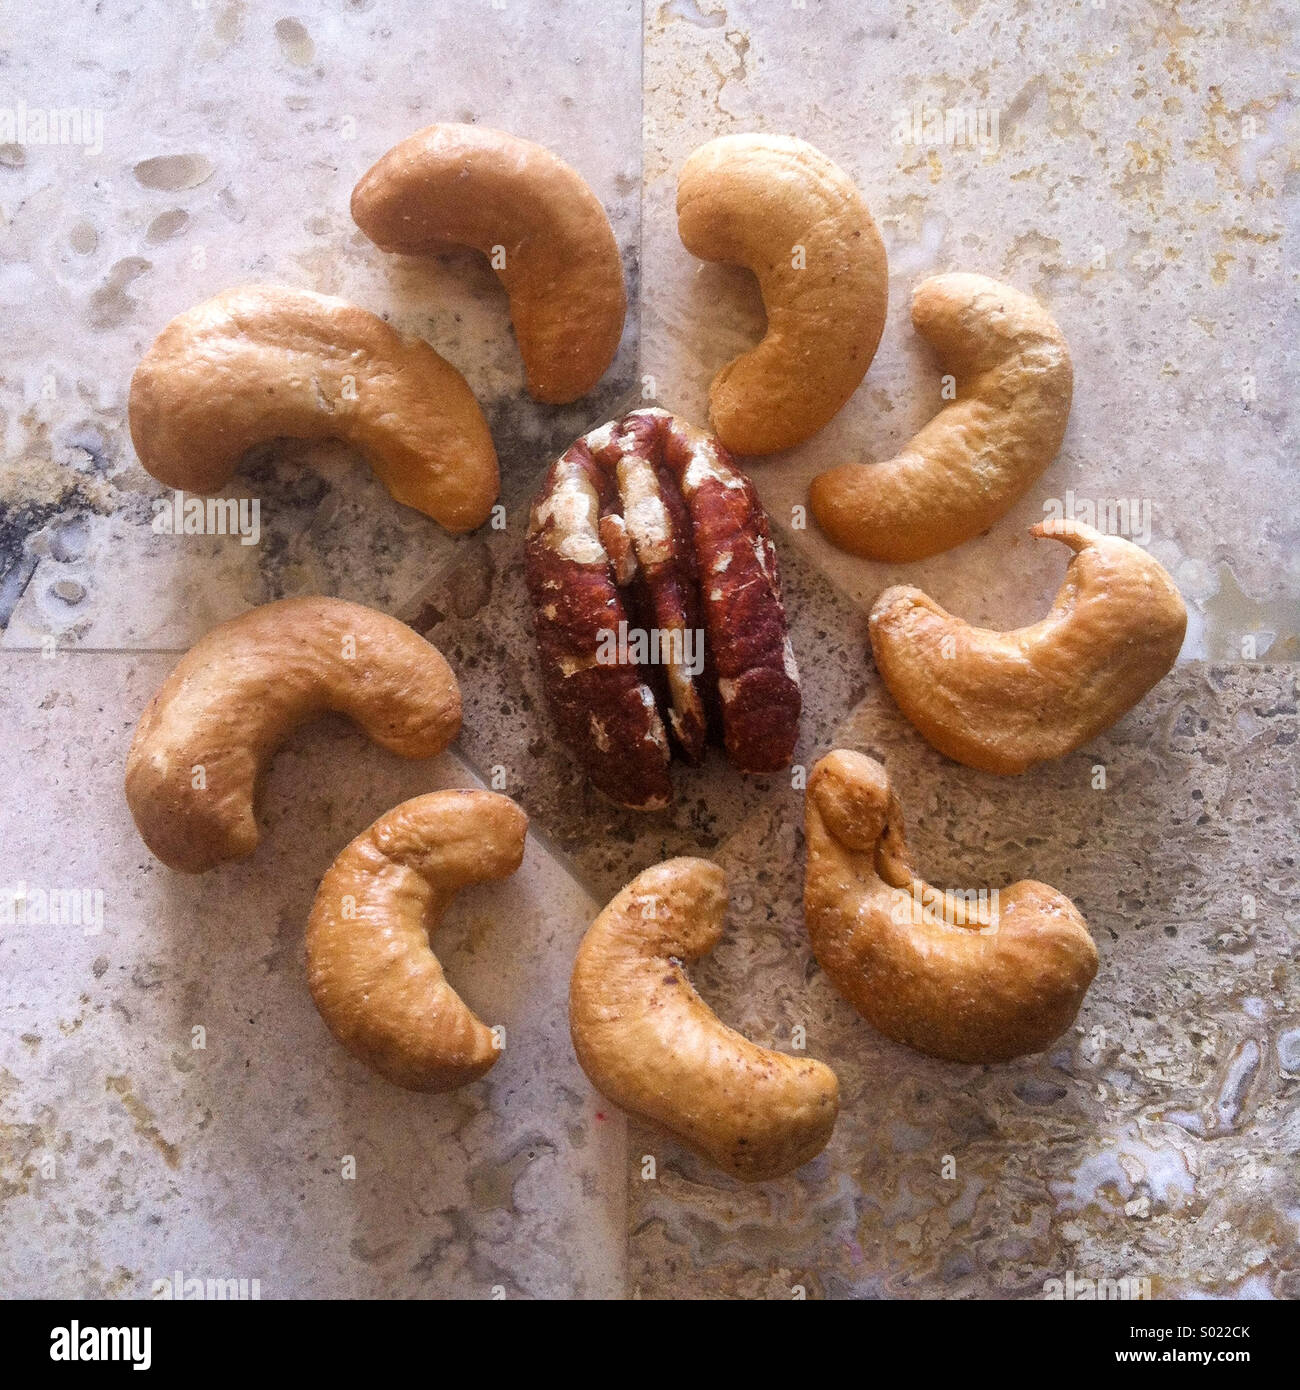 A flower design created with cashews and a walnut Stock Photo